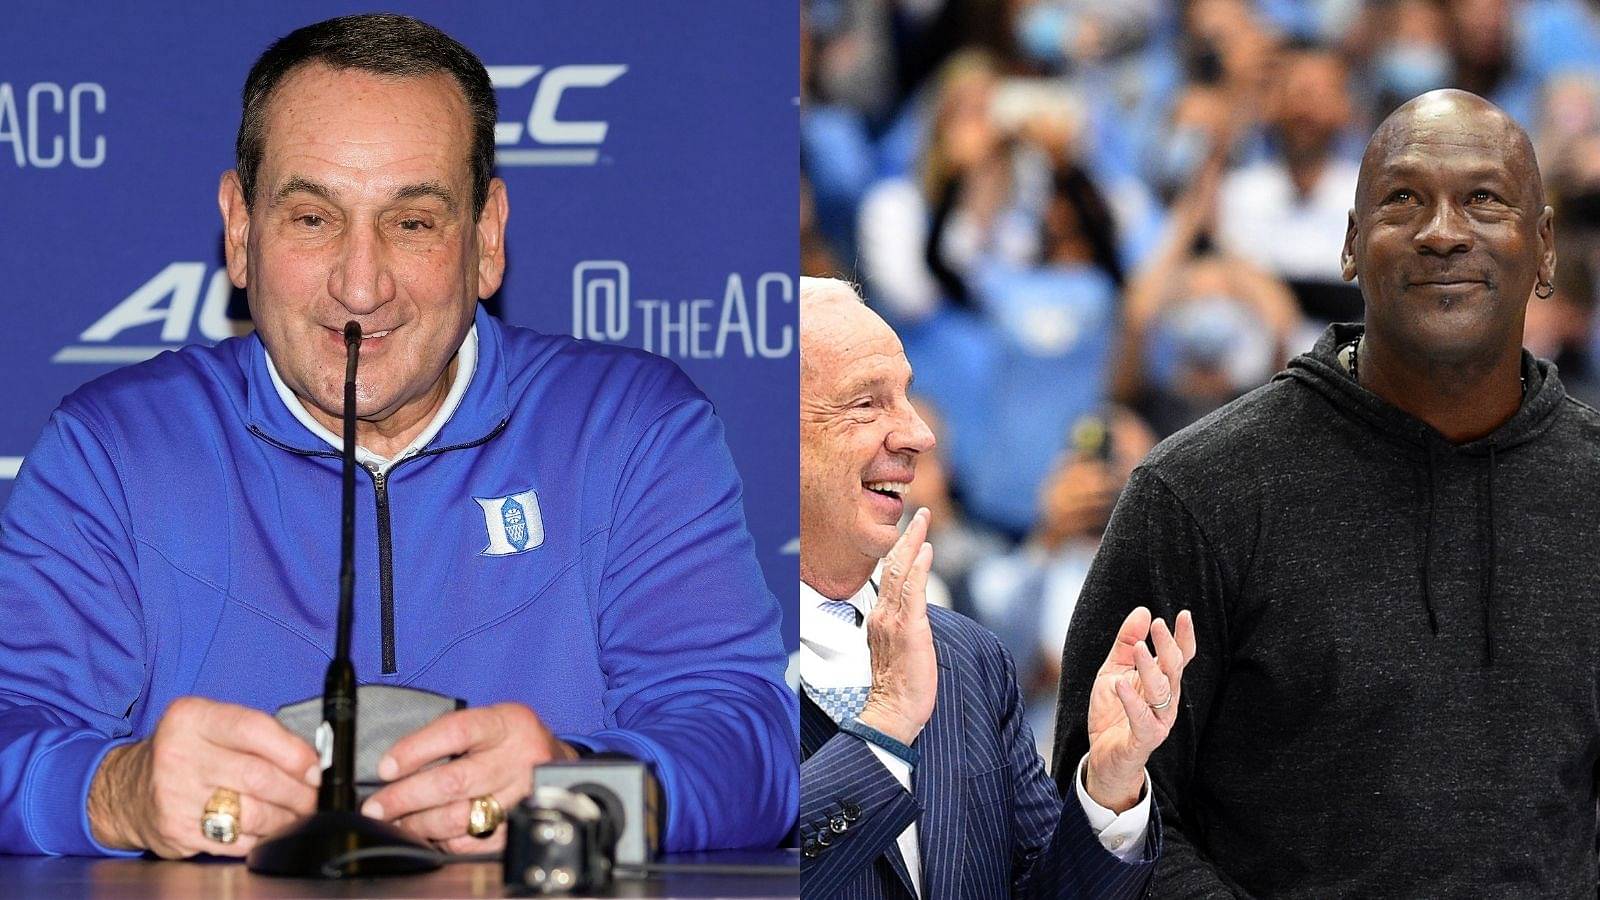 "Michael Jordan, I'm sorry you no longer have an interest in Duke": When Coach K wrote a gracious letter to MJ after he chose not to represent UNC's rivals